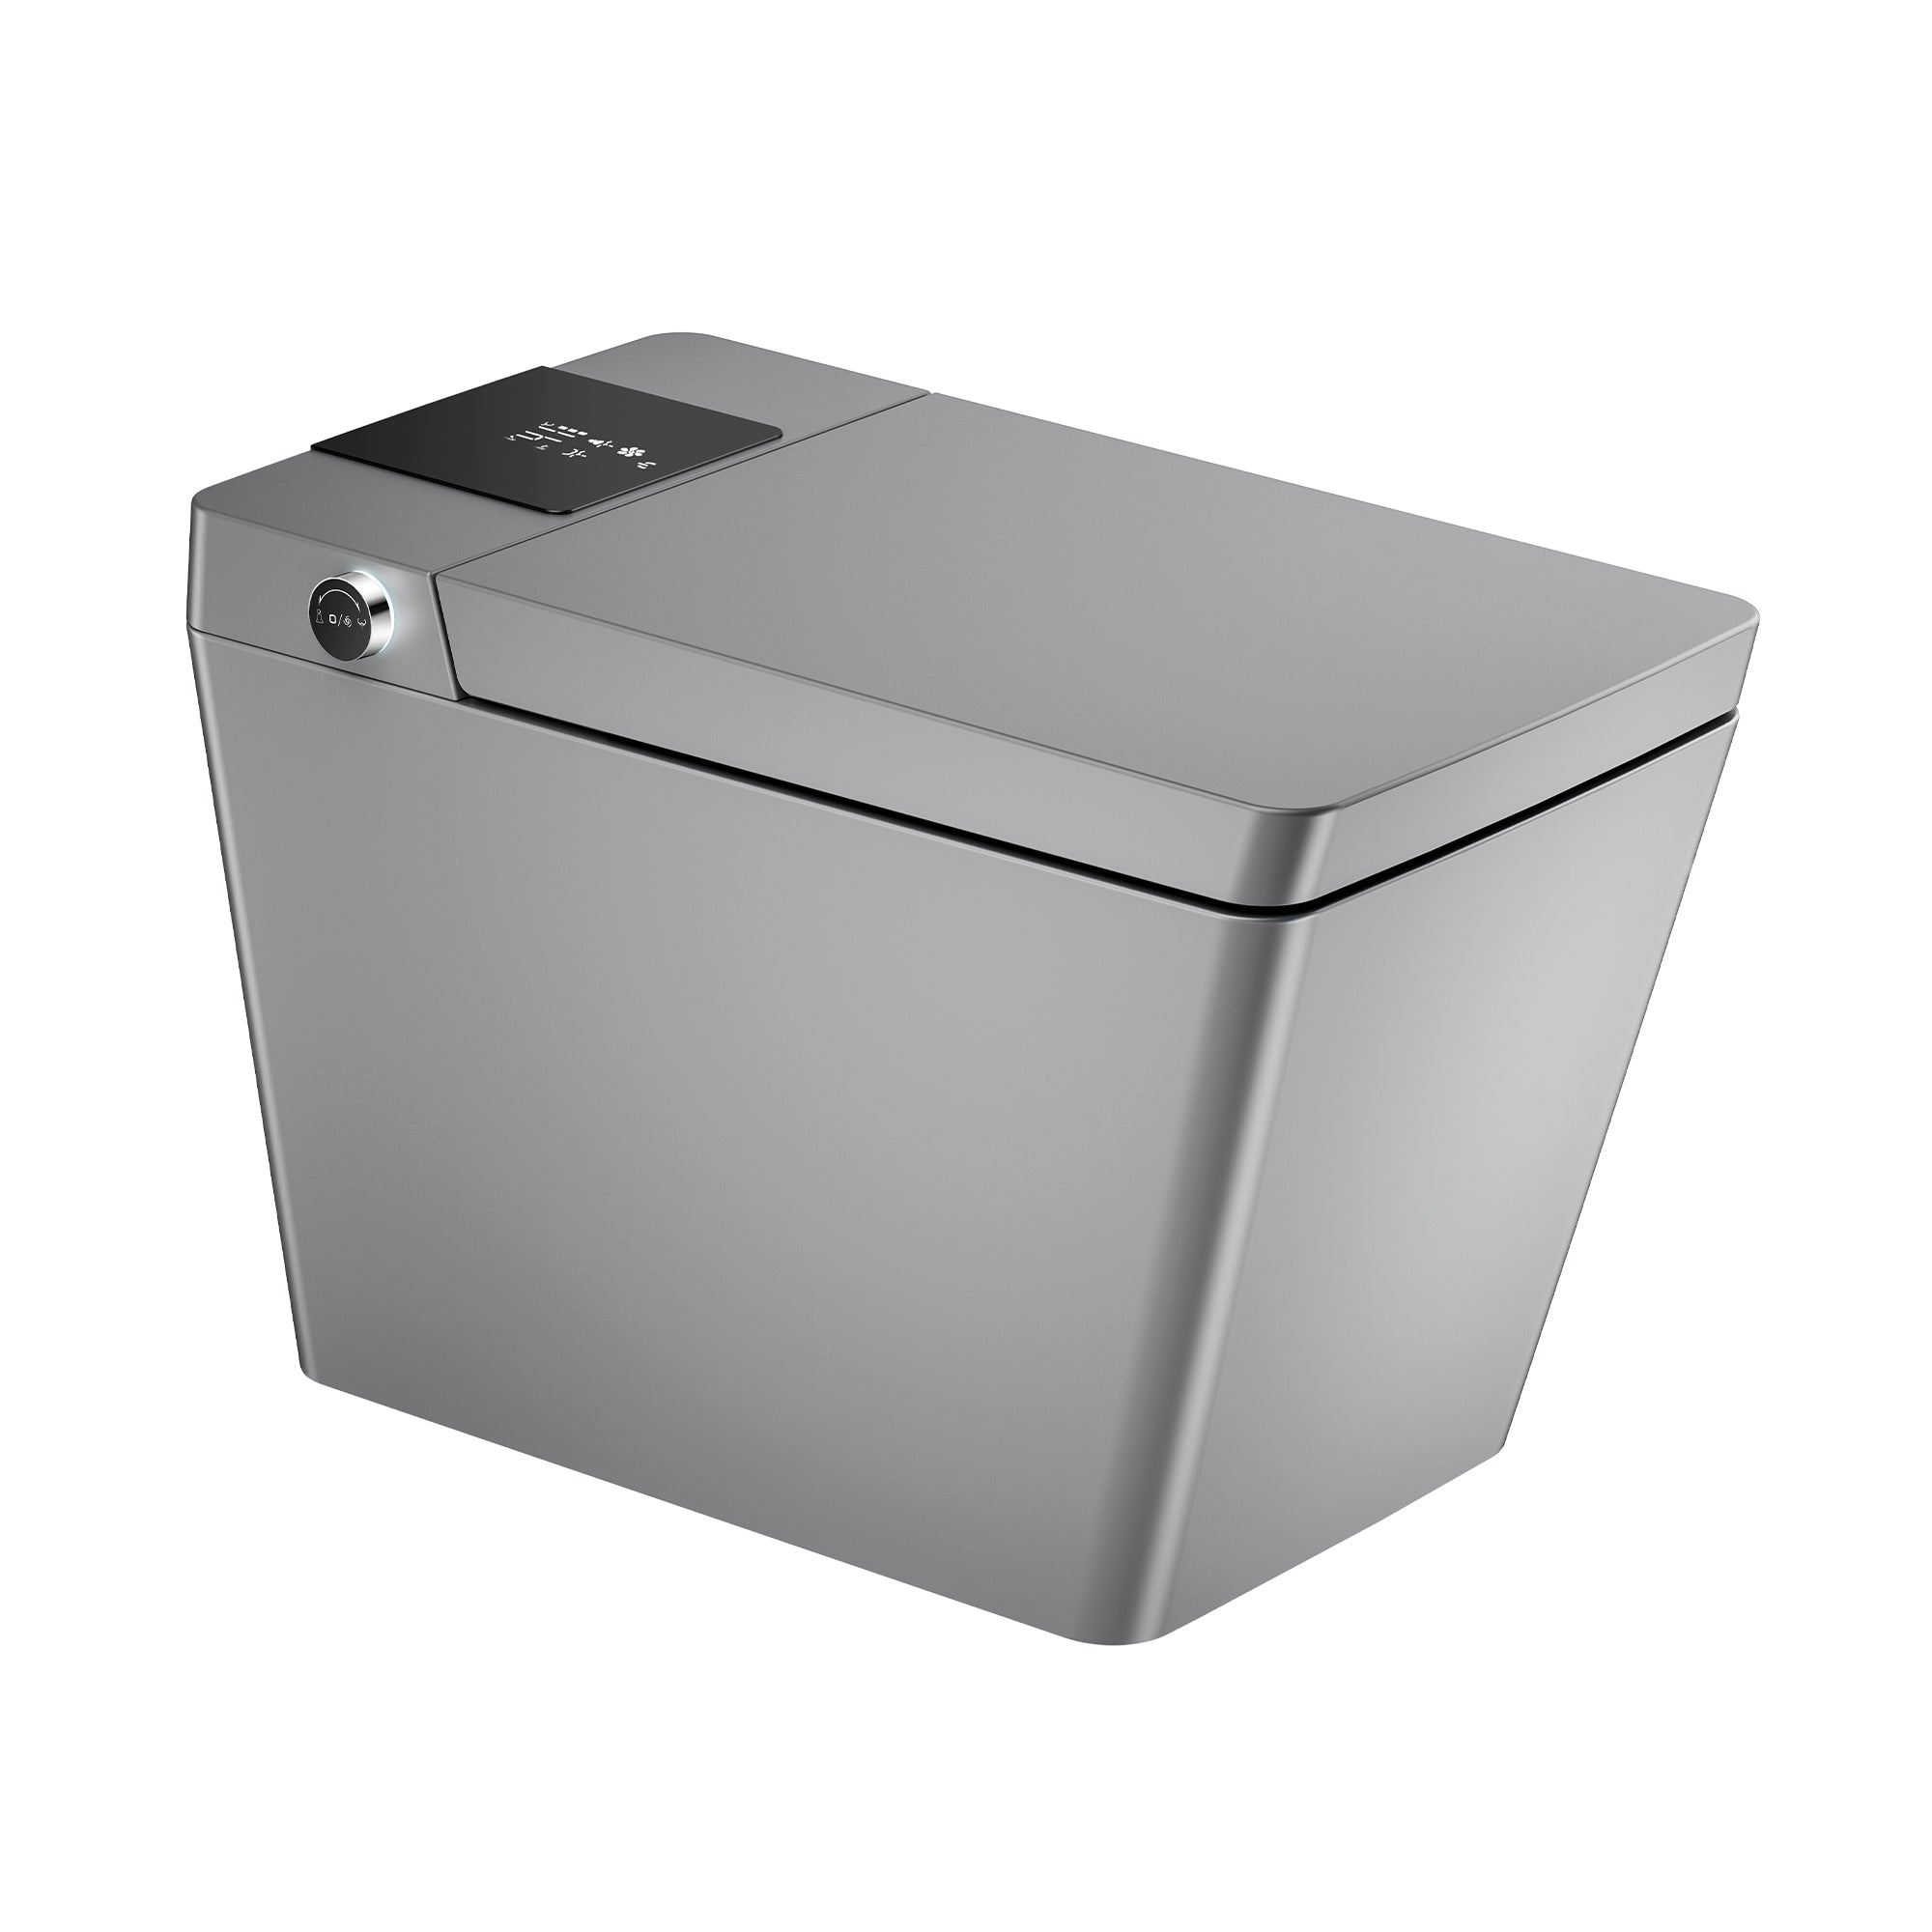 Multifunctional Smart Toilet with Remote Control, Foot Sensor, Night Light in Matte Grey